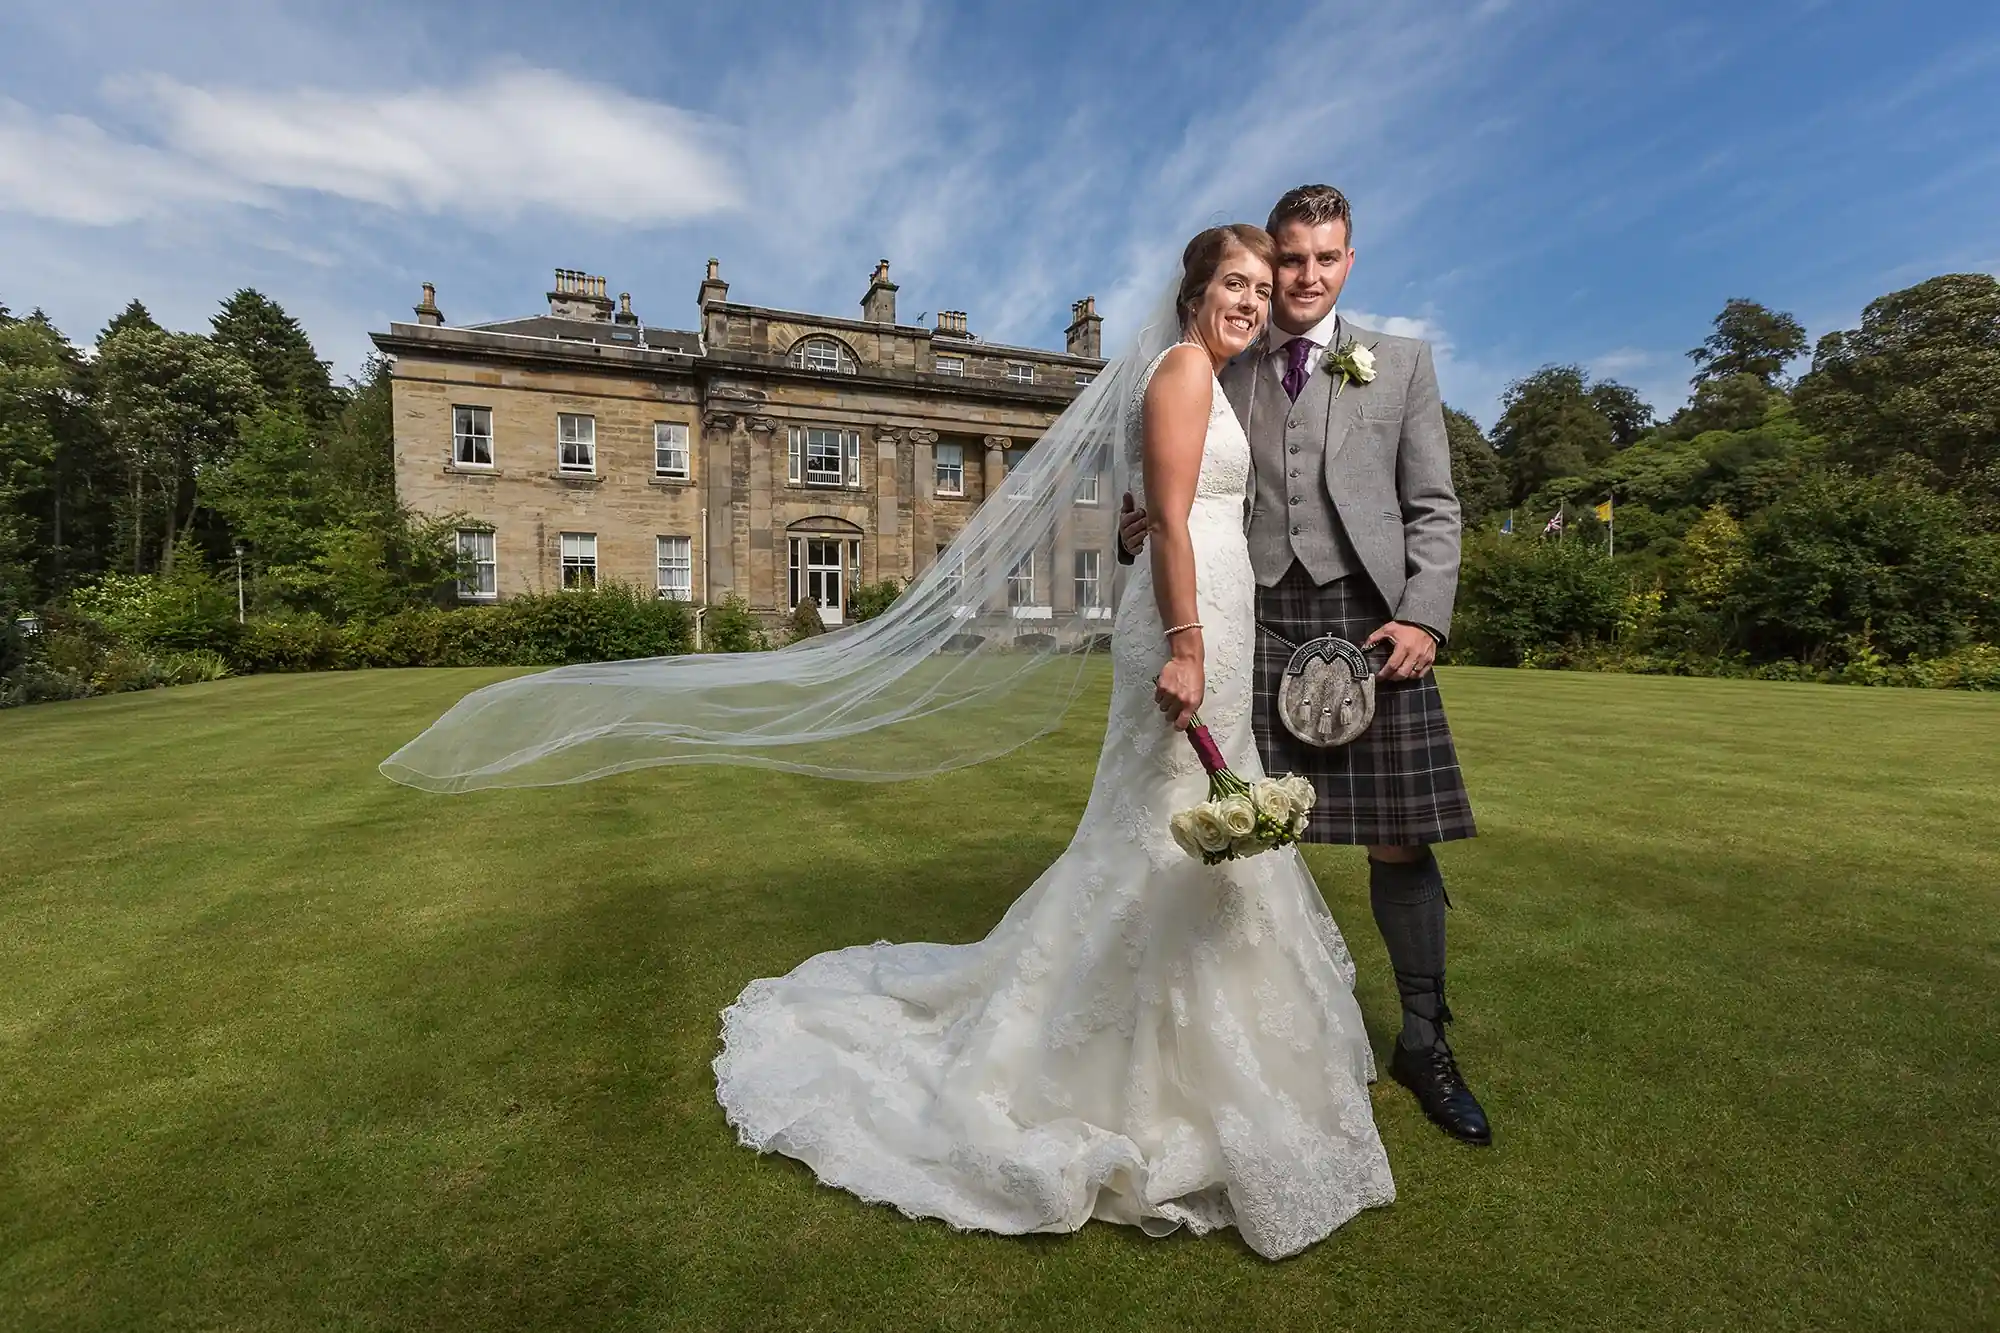 A bride in a white dress and a groom in a kilt smiling on a grass lawn with a stately home in the background on a sunny day.